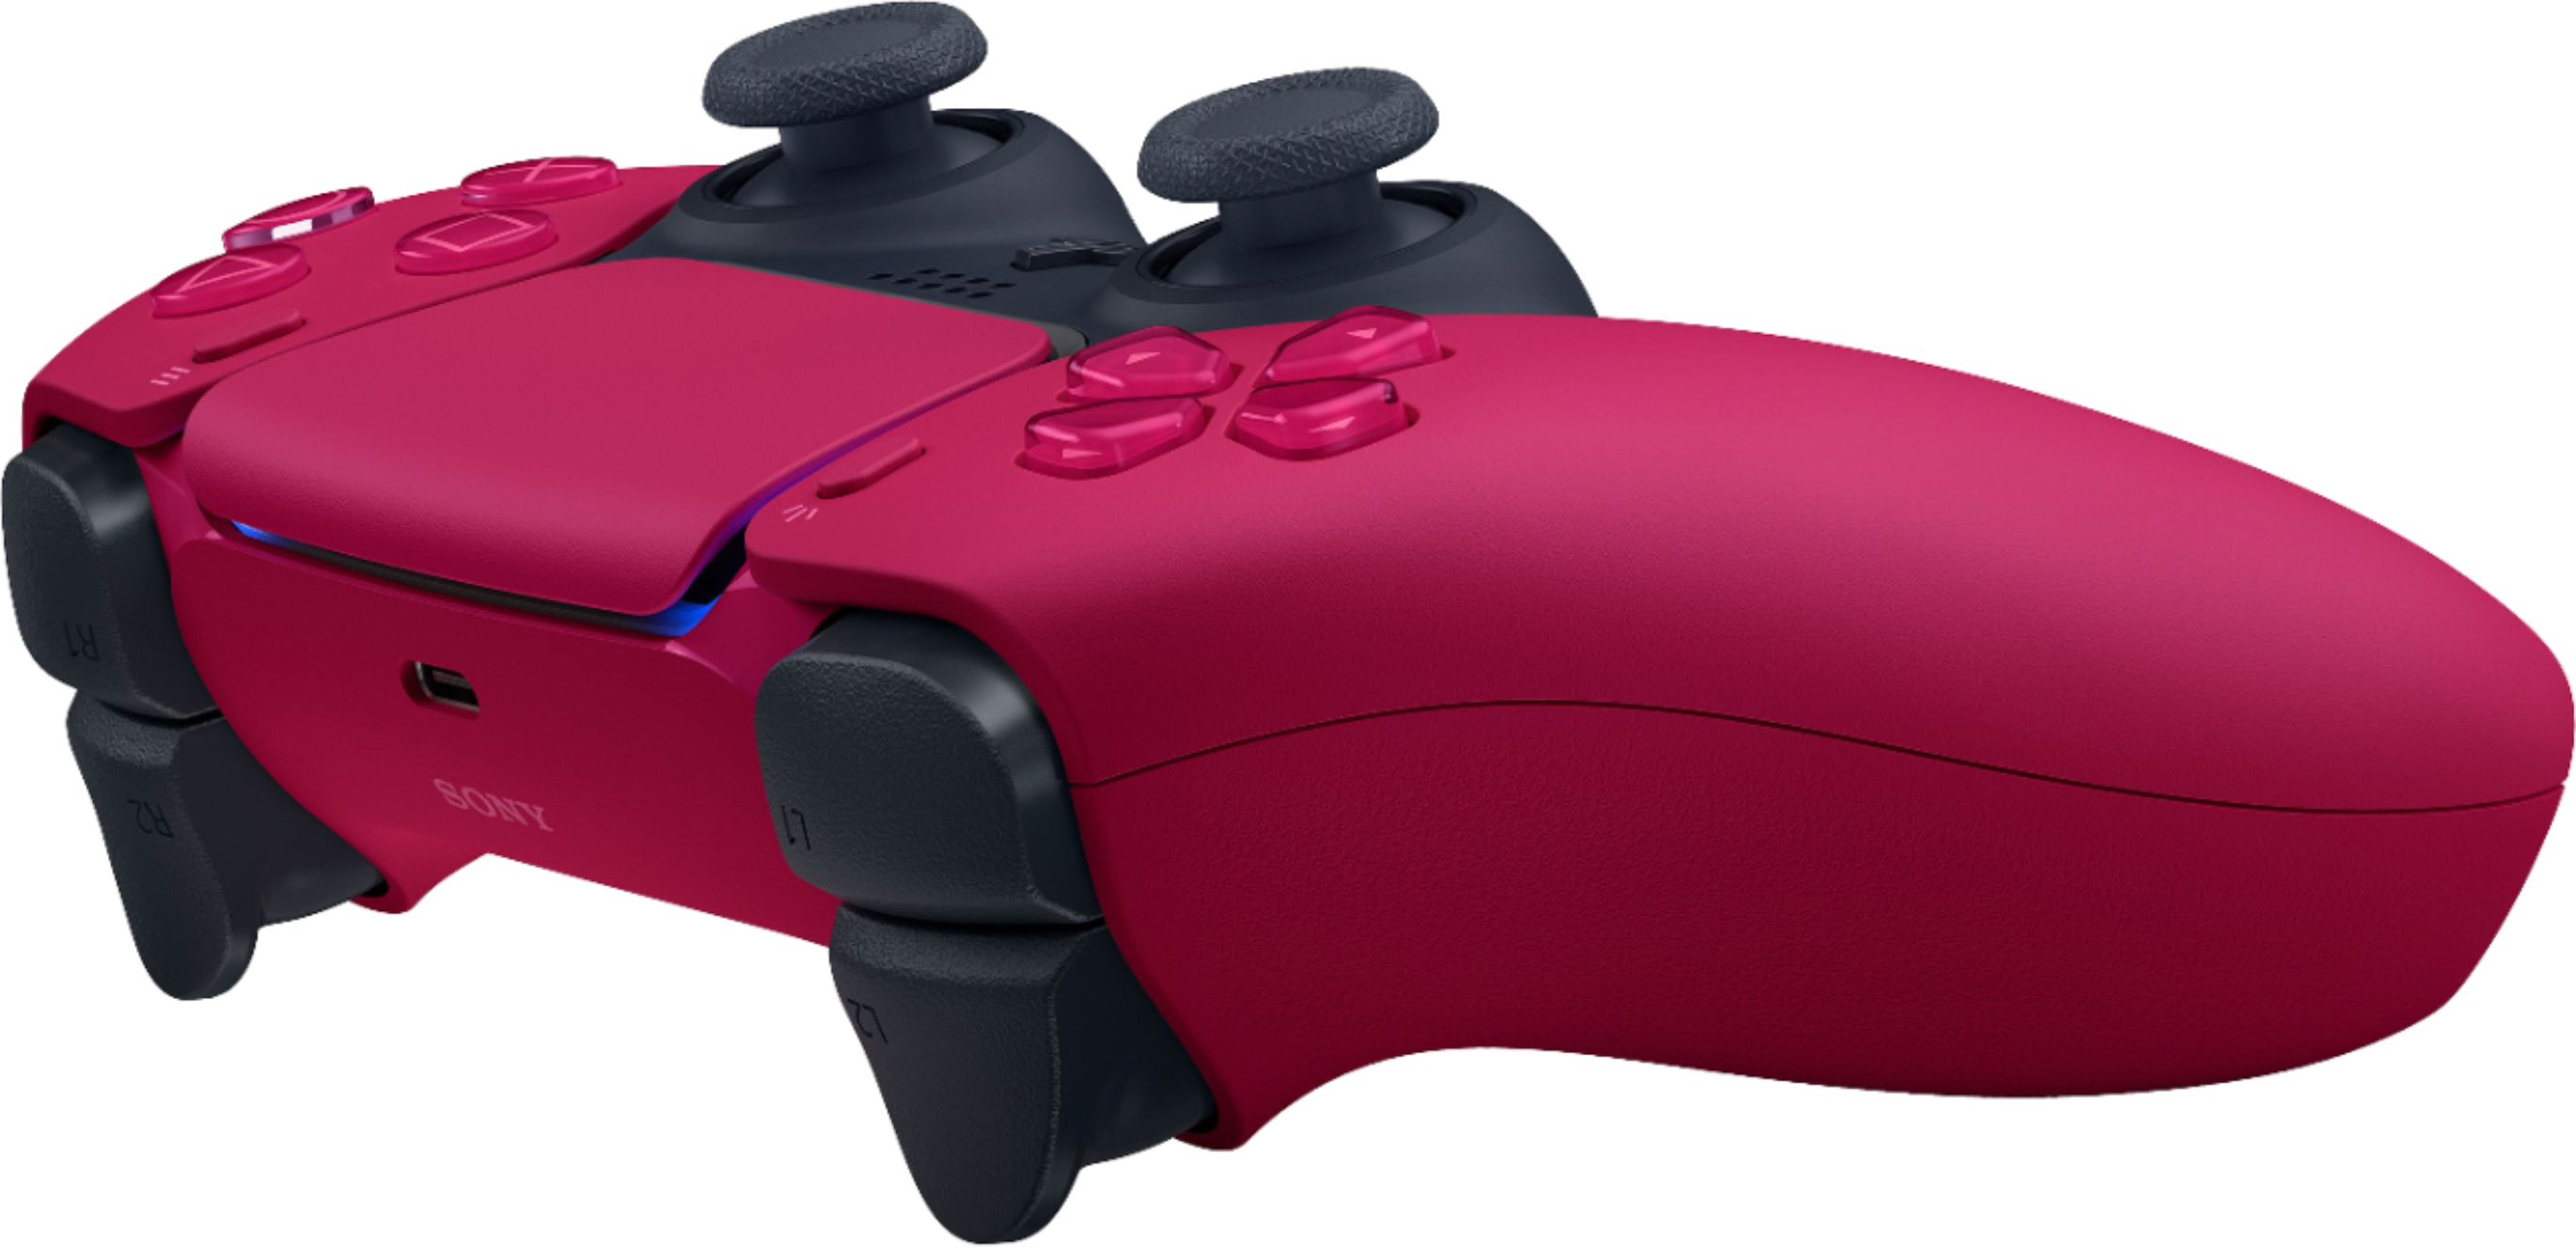 Sony PlayStation 5 DualSense Wireless Controller Cosmic Red 